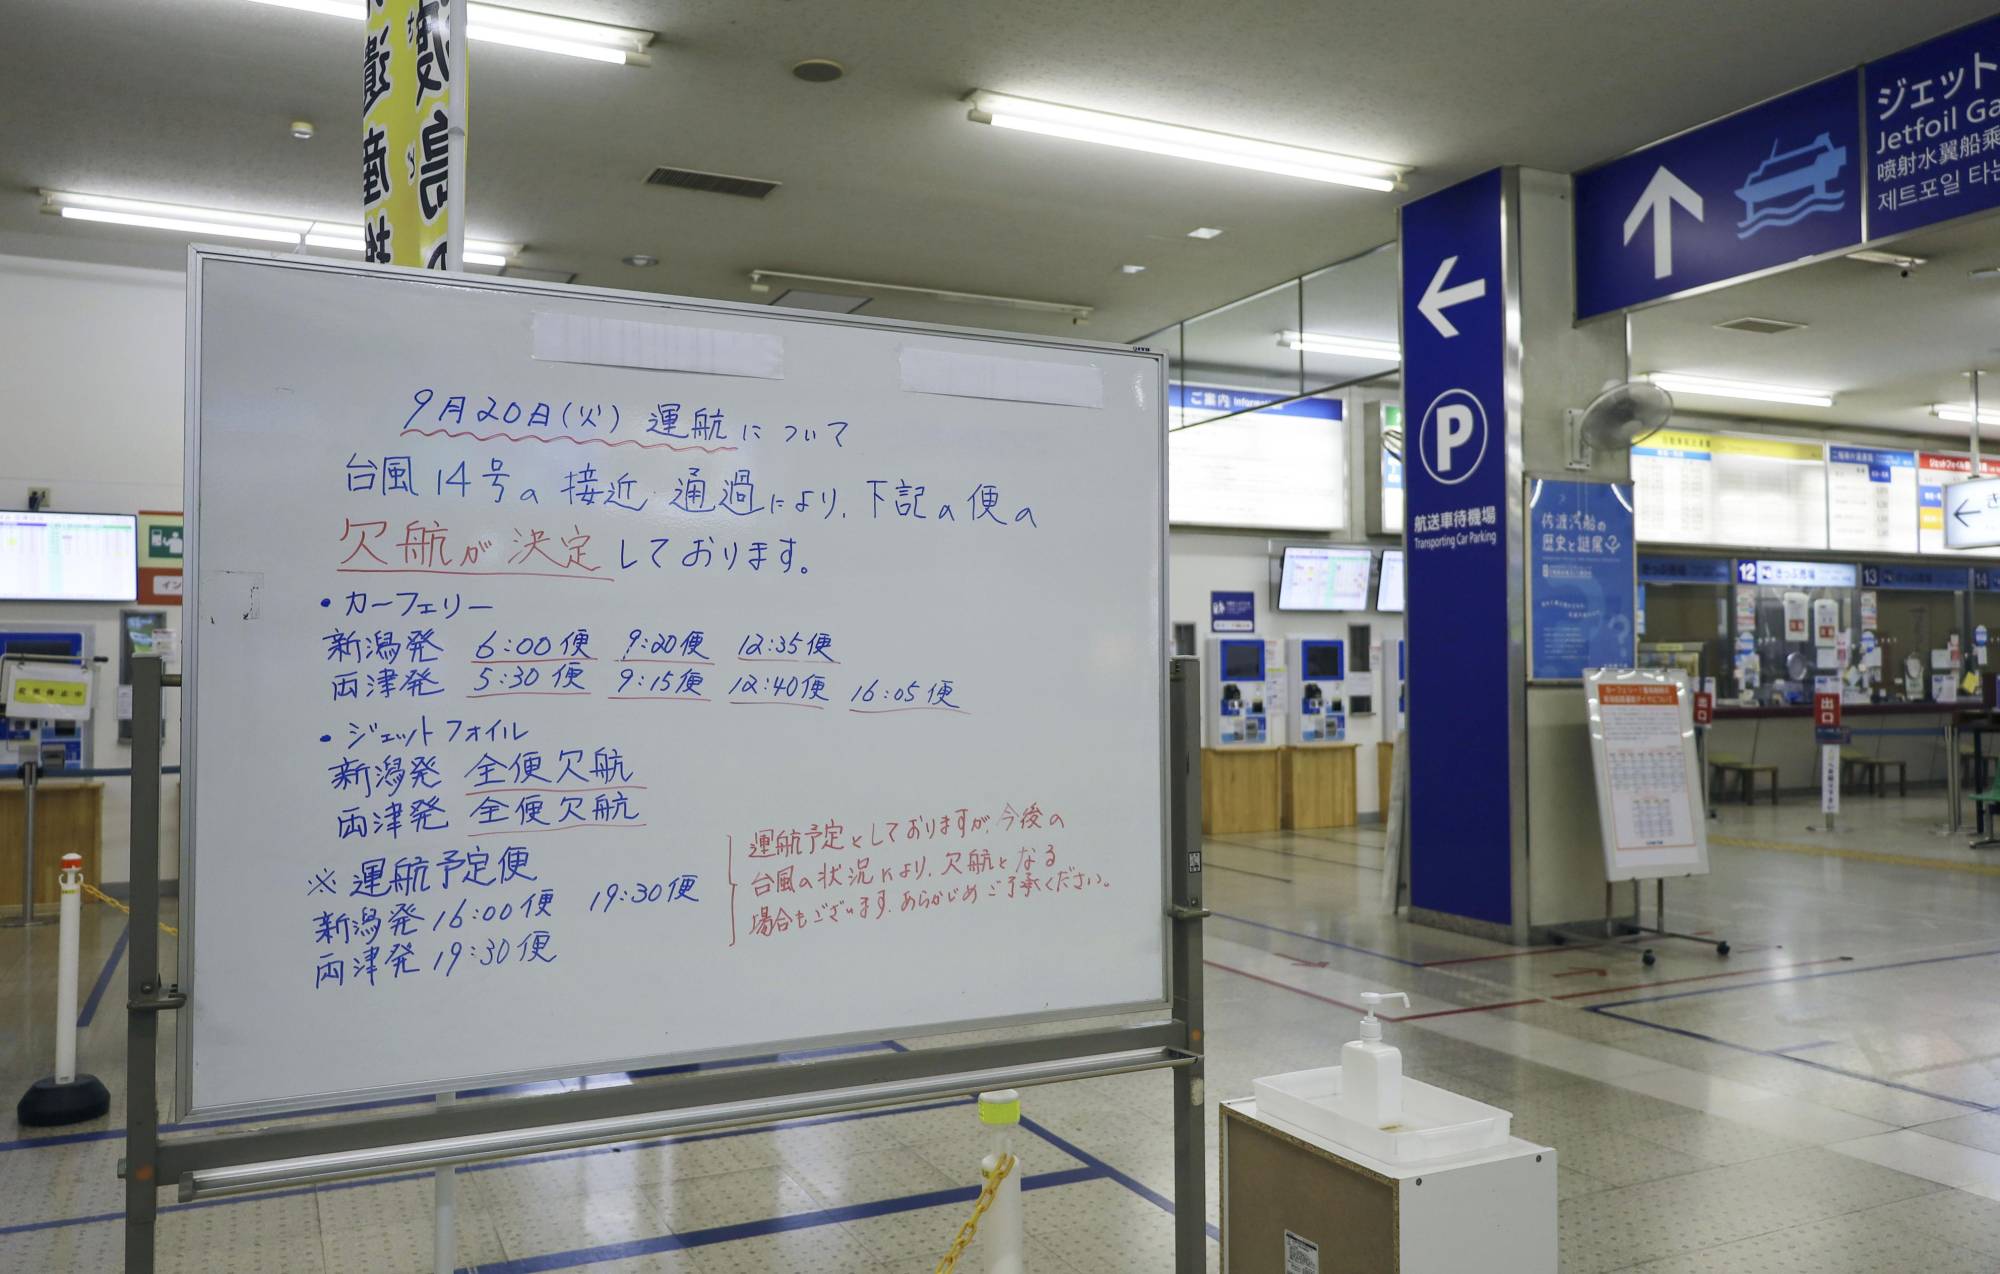 A signboard shows cancellations of ferry operations in the city of Niigata on Tuesday as Typhoon Nanmadol moved through the area. | Kyodo